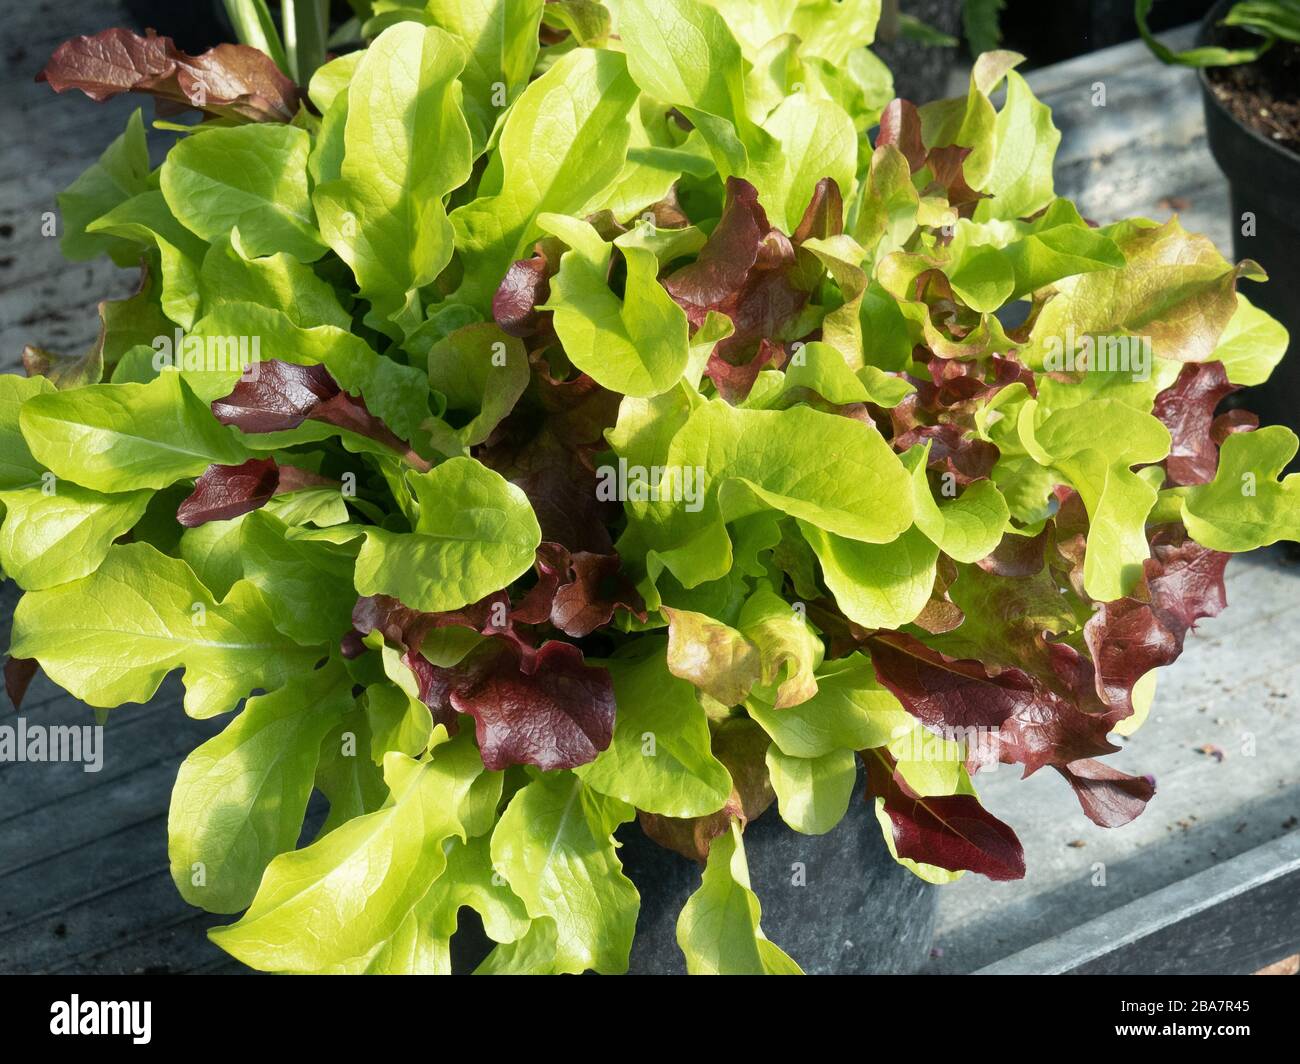 A pot full of young leaf lettuce ready to cut Stock Photo